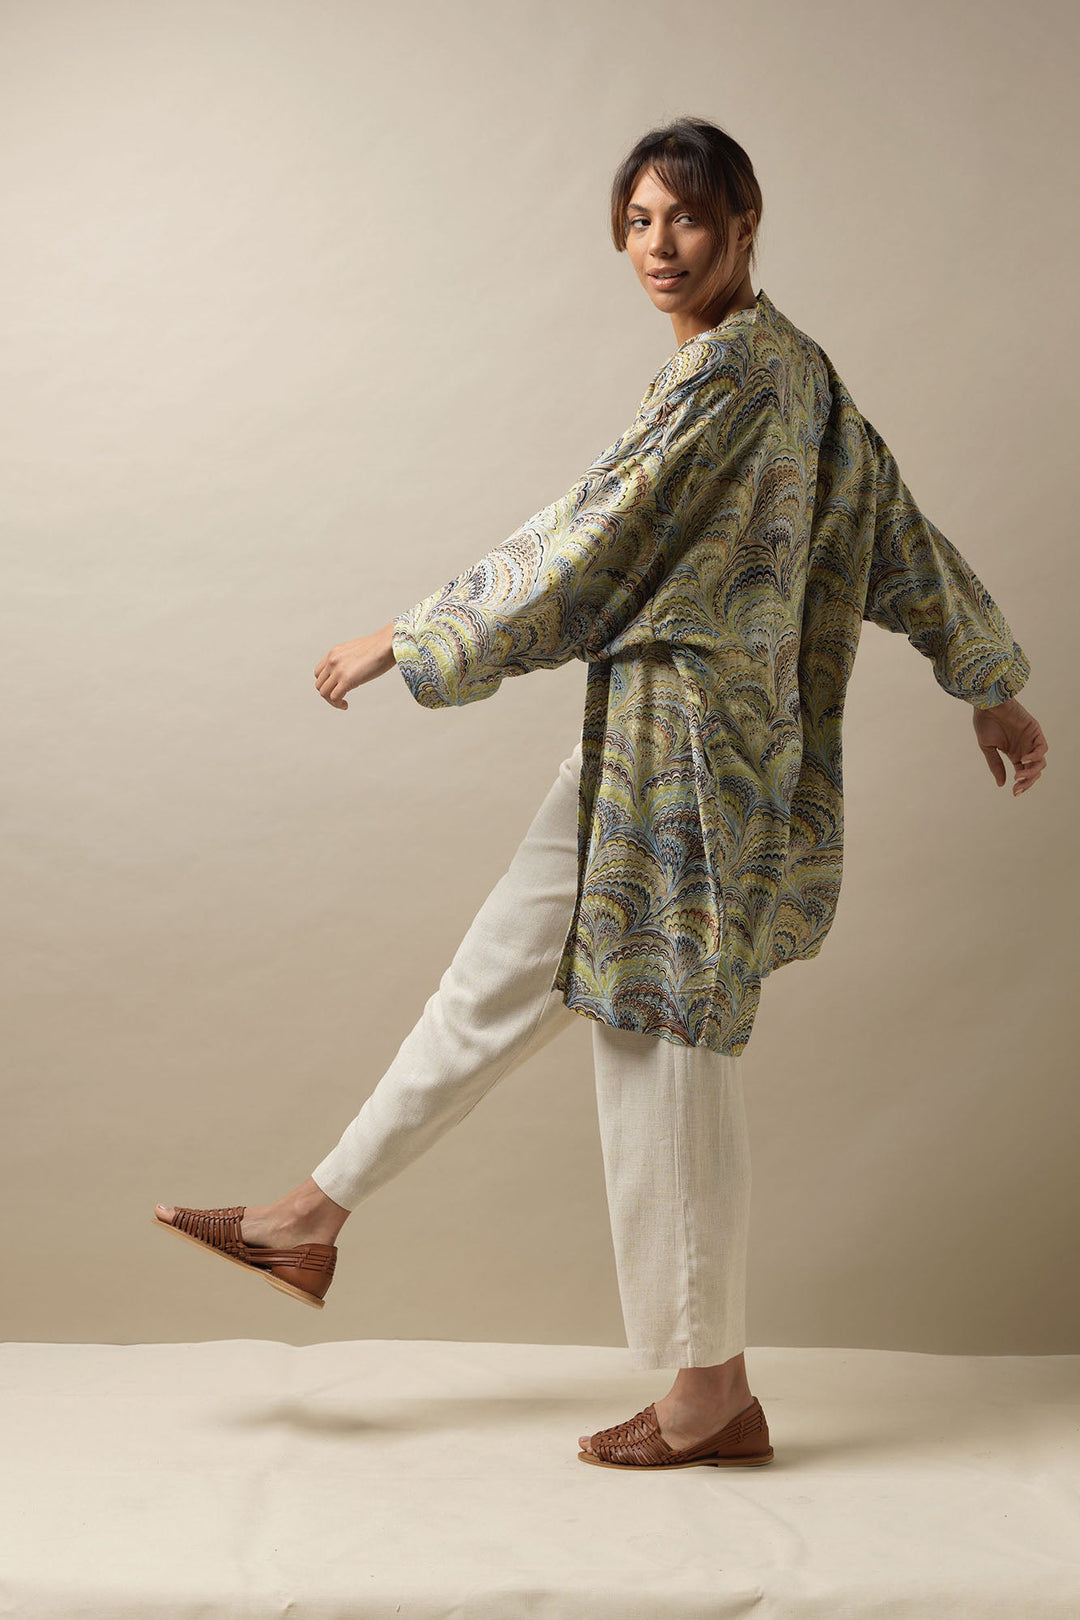 One Hundred Stars marbled green blue and brown mid length kimono jacket. These cover ups can be worn with linen trousers and woven sandals to create a must have look this summer. 